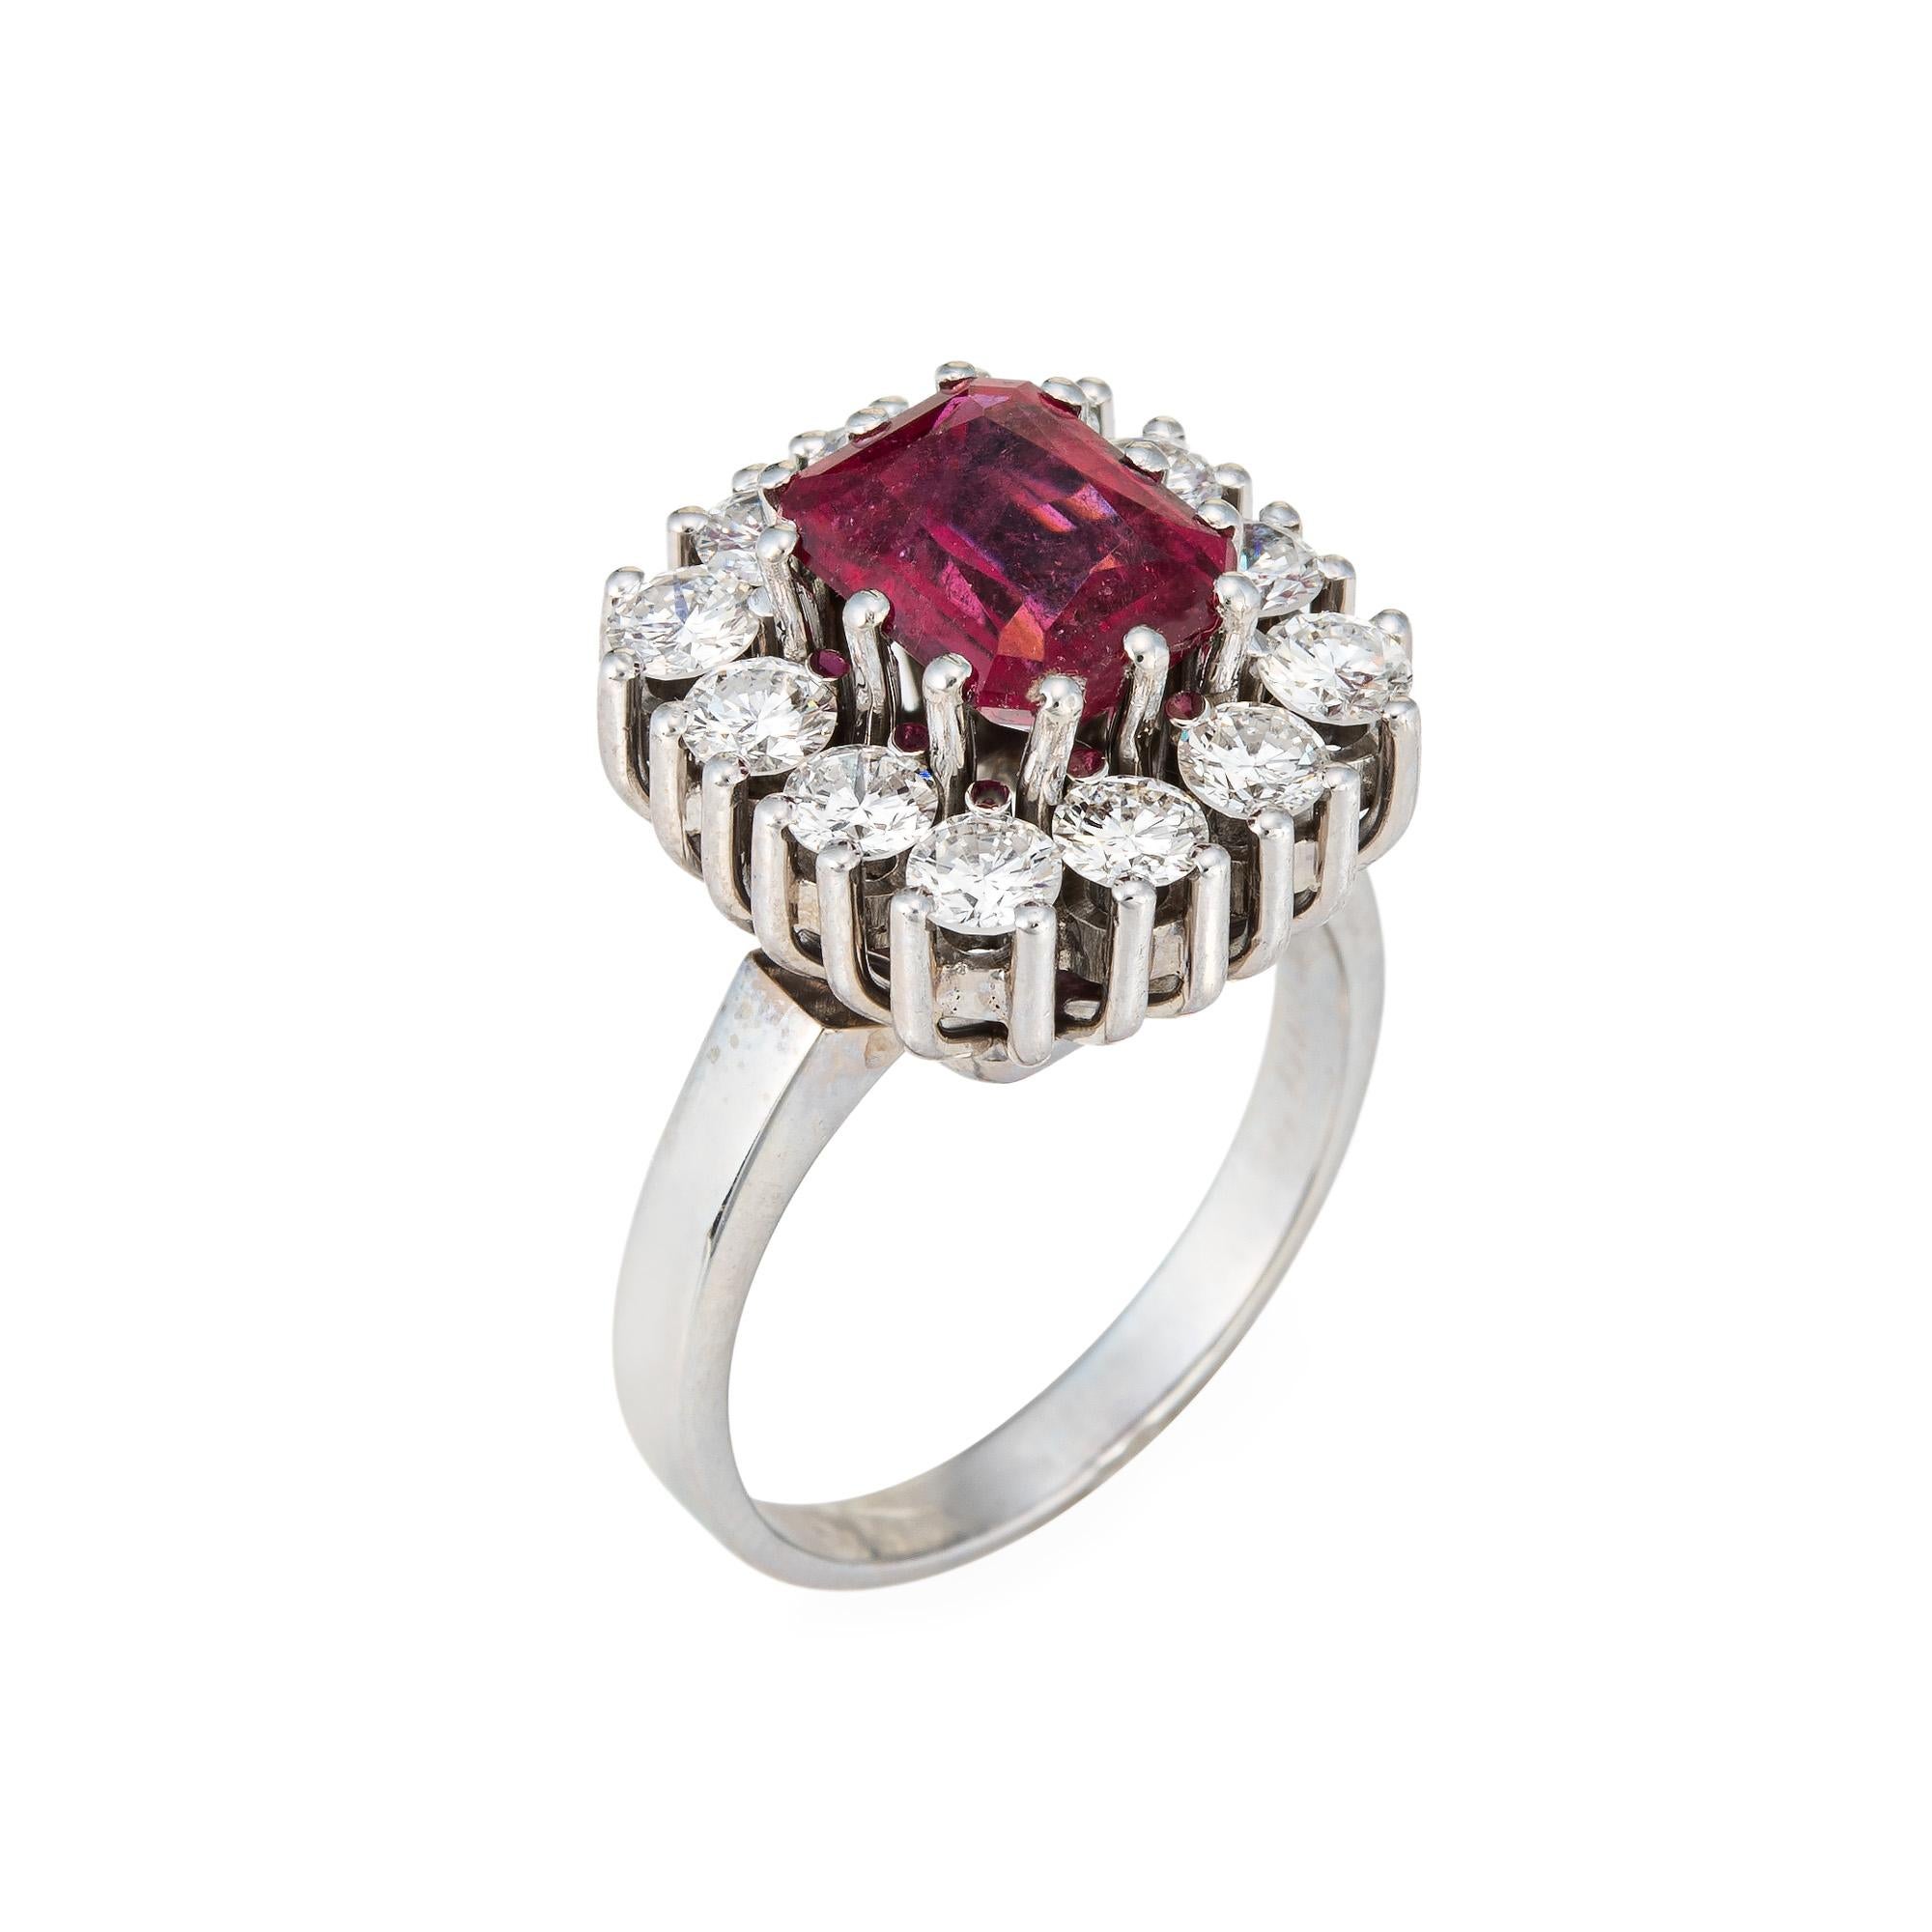 Square cut pink tourmaline measures 9mm x 7.5mm (estimated at 2.50 carats). Round brilliant cut diamonds total an estimated 1.10 carats (estimated at I-J color and VS2-SI2 clarity). The pink tourmaline is in very good condition and free of cracks or